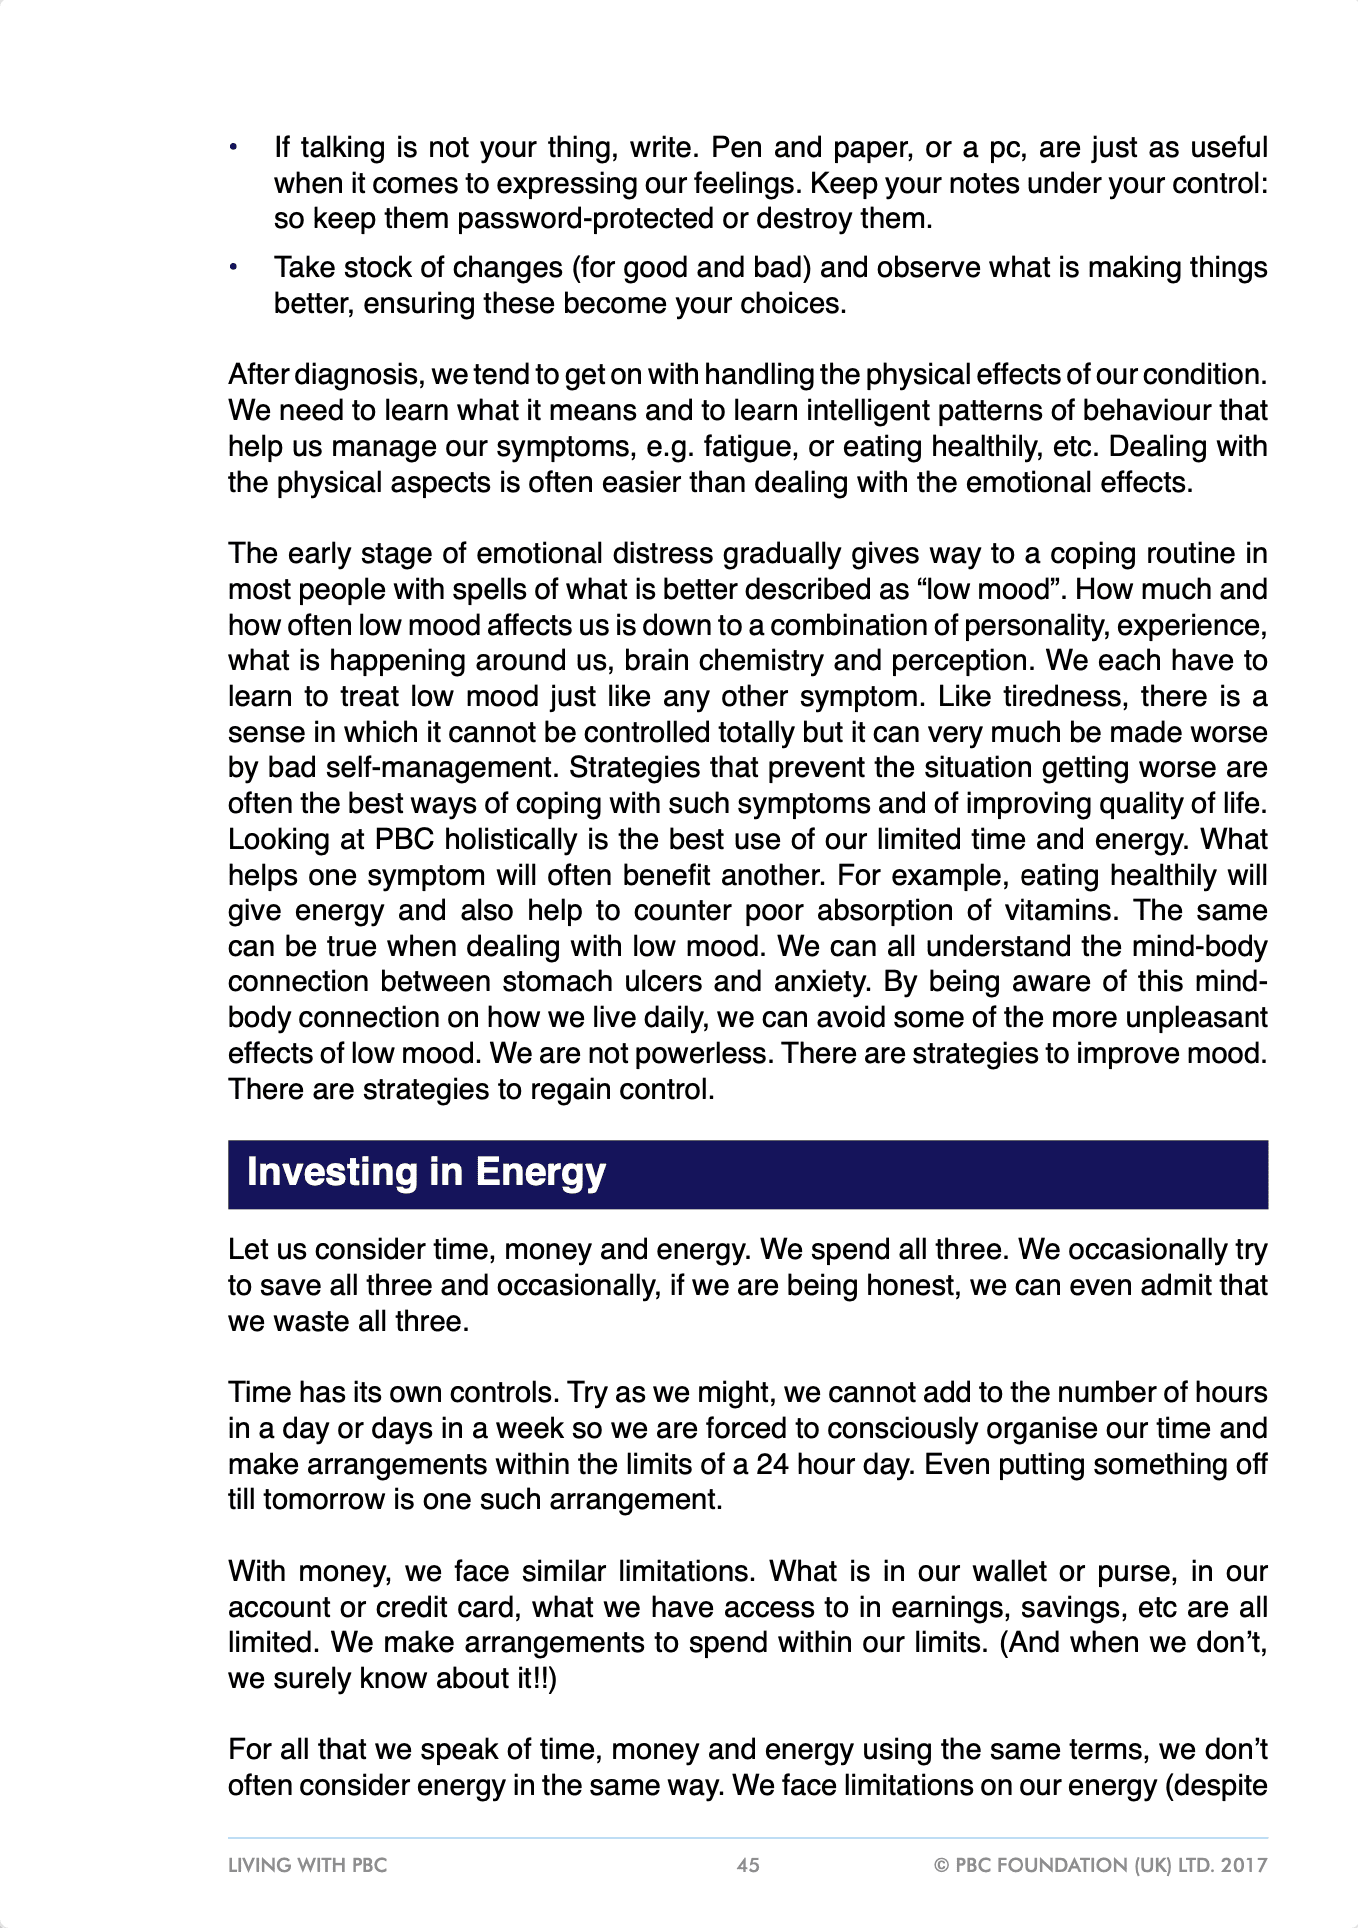 A page of text from the PBC Foundation Compendium about investing in energy